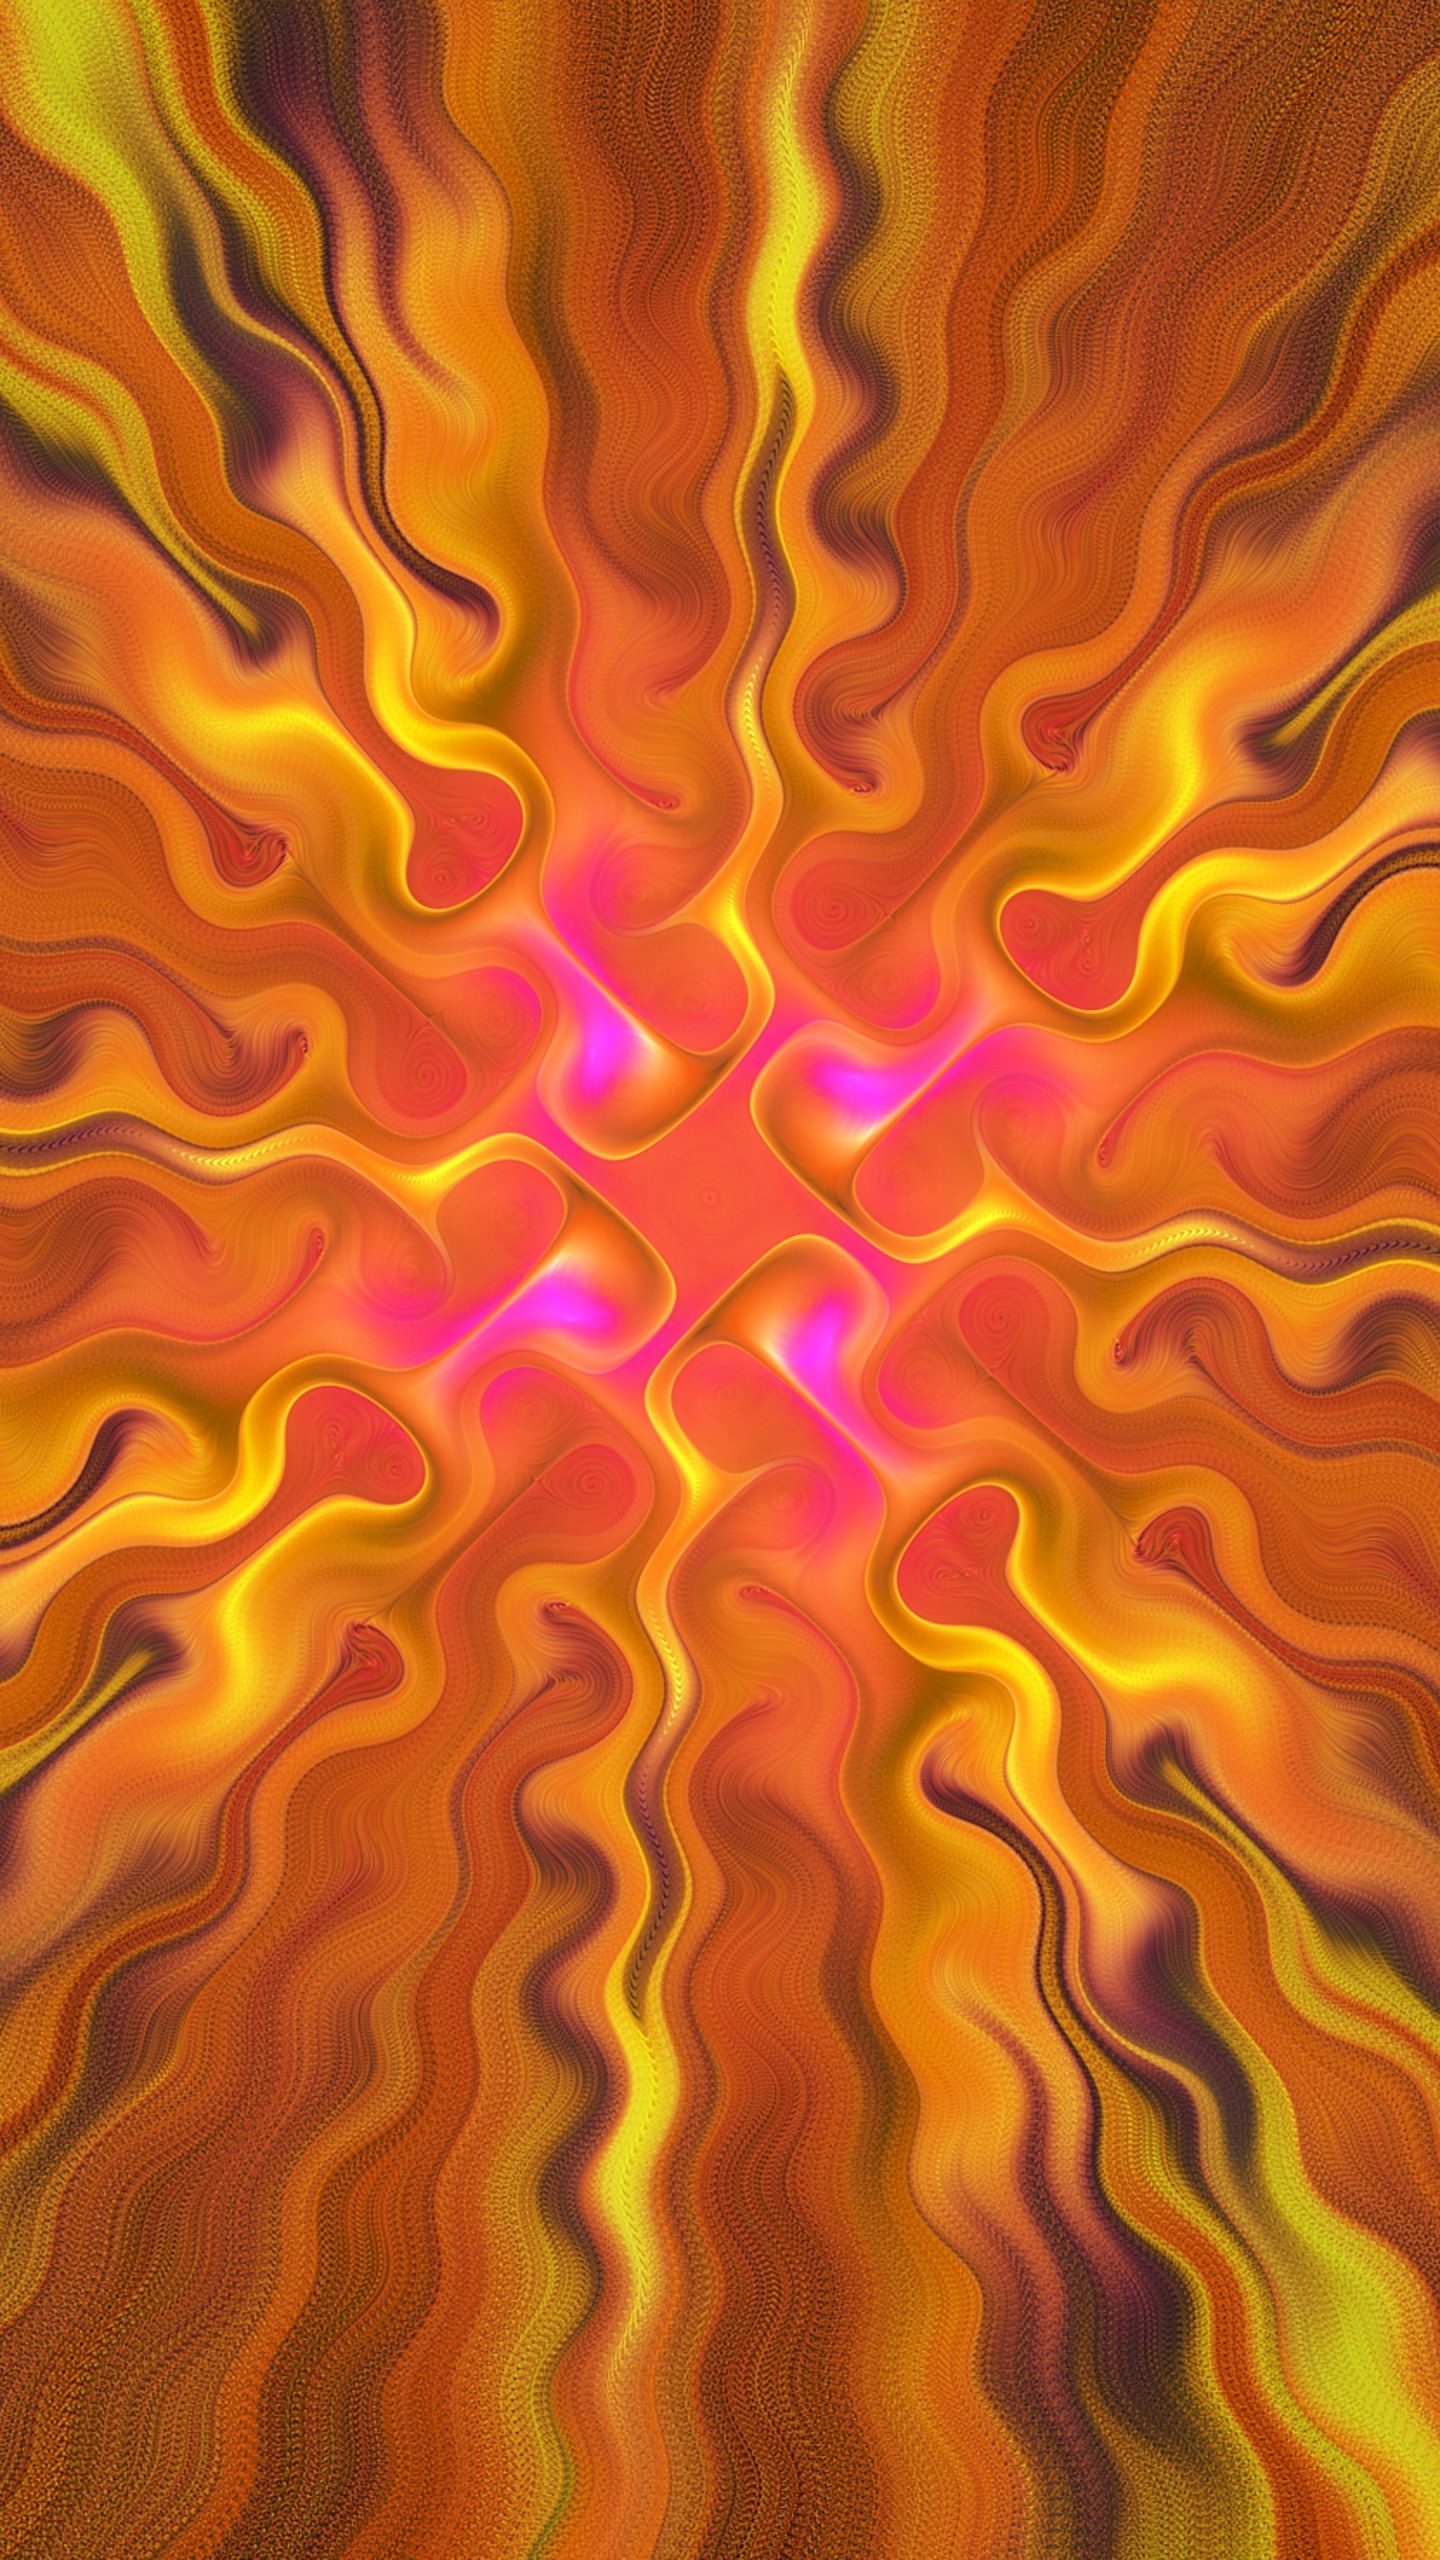 Orange and Yellow Abstract Painting. Wallpaper in 1440x2560 Resolution